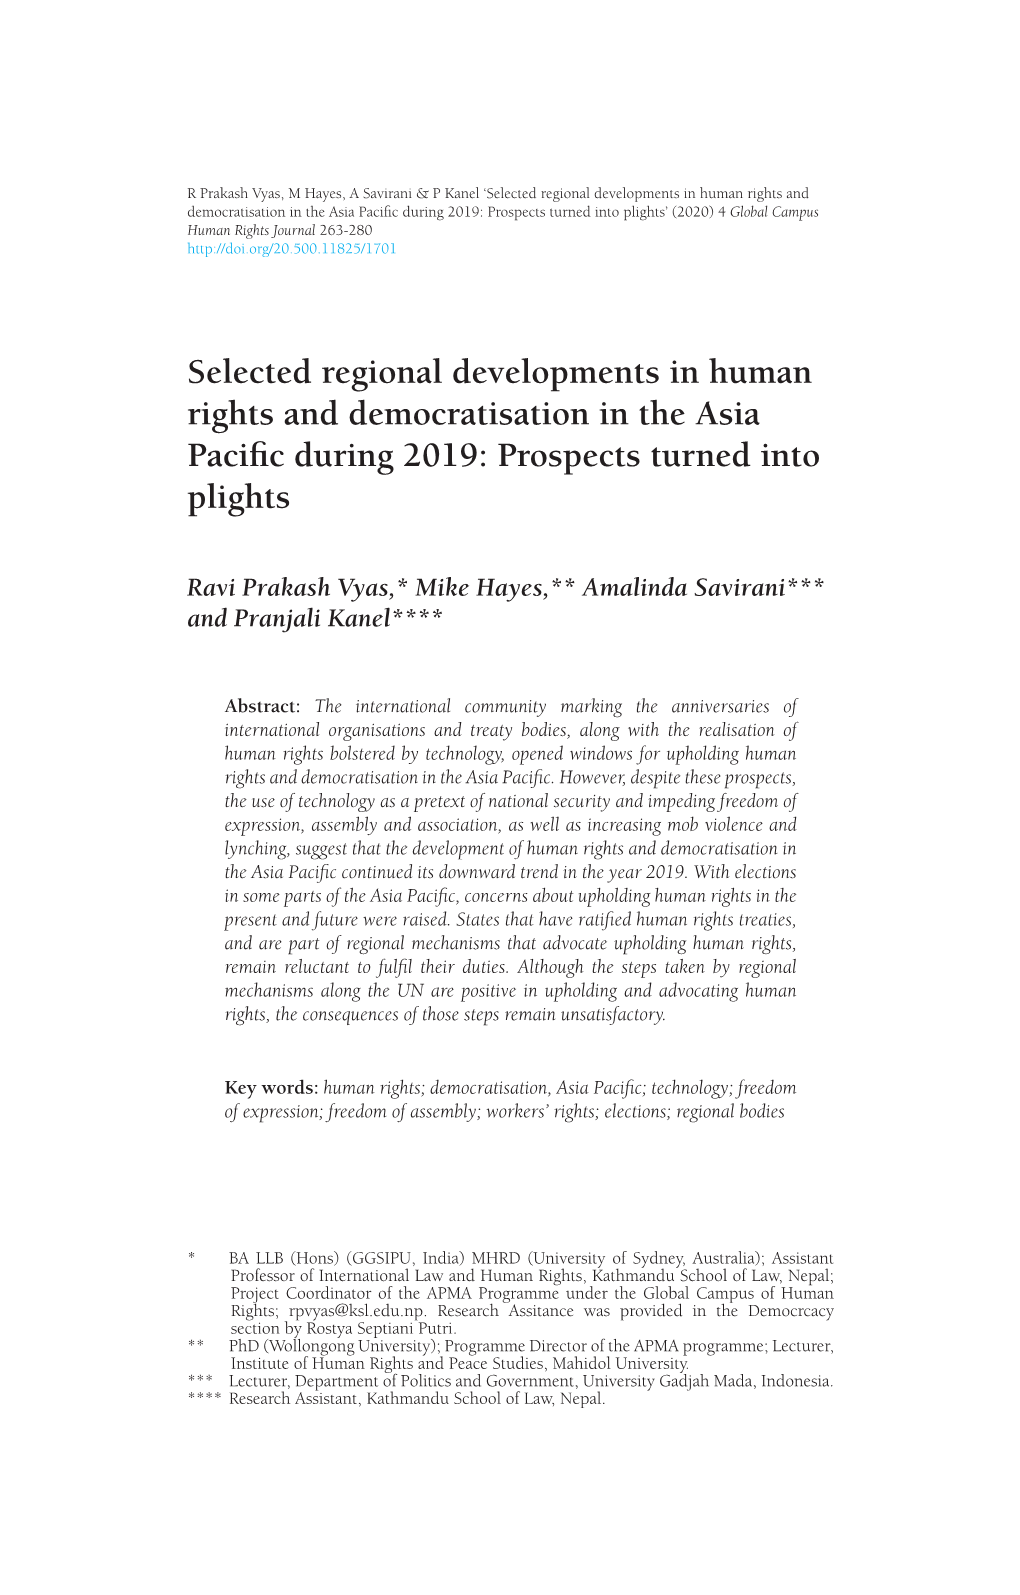 Selected Regional Developments in Human Rights and Democratisation